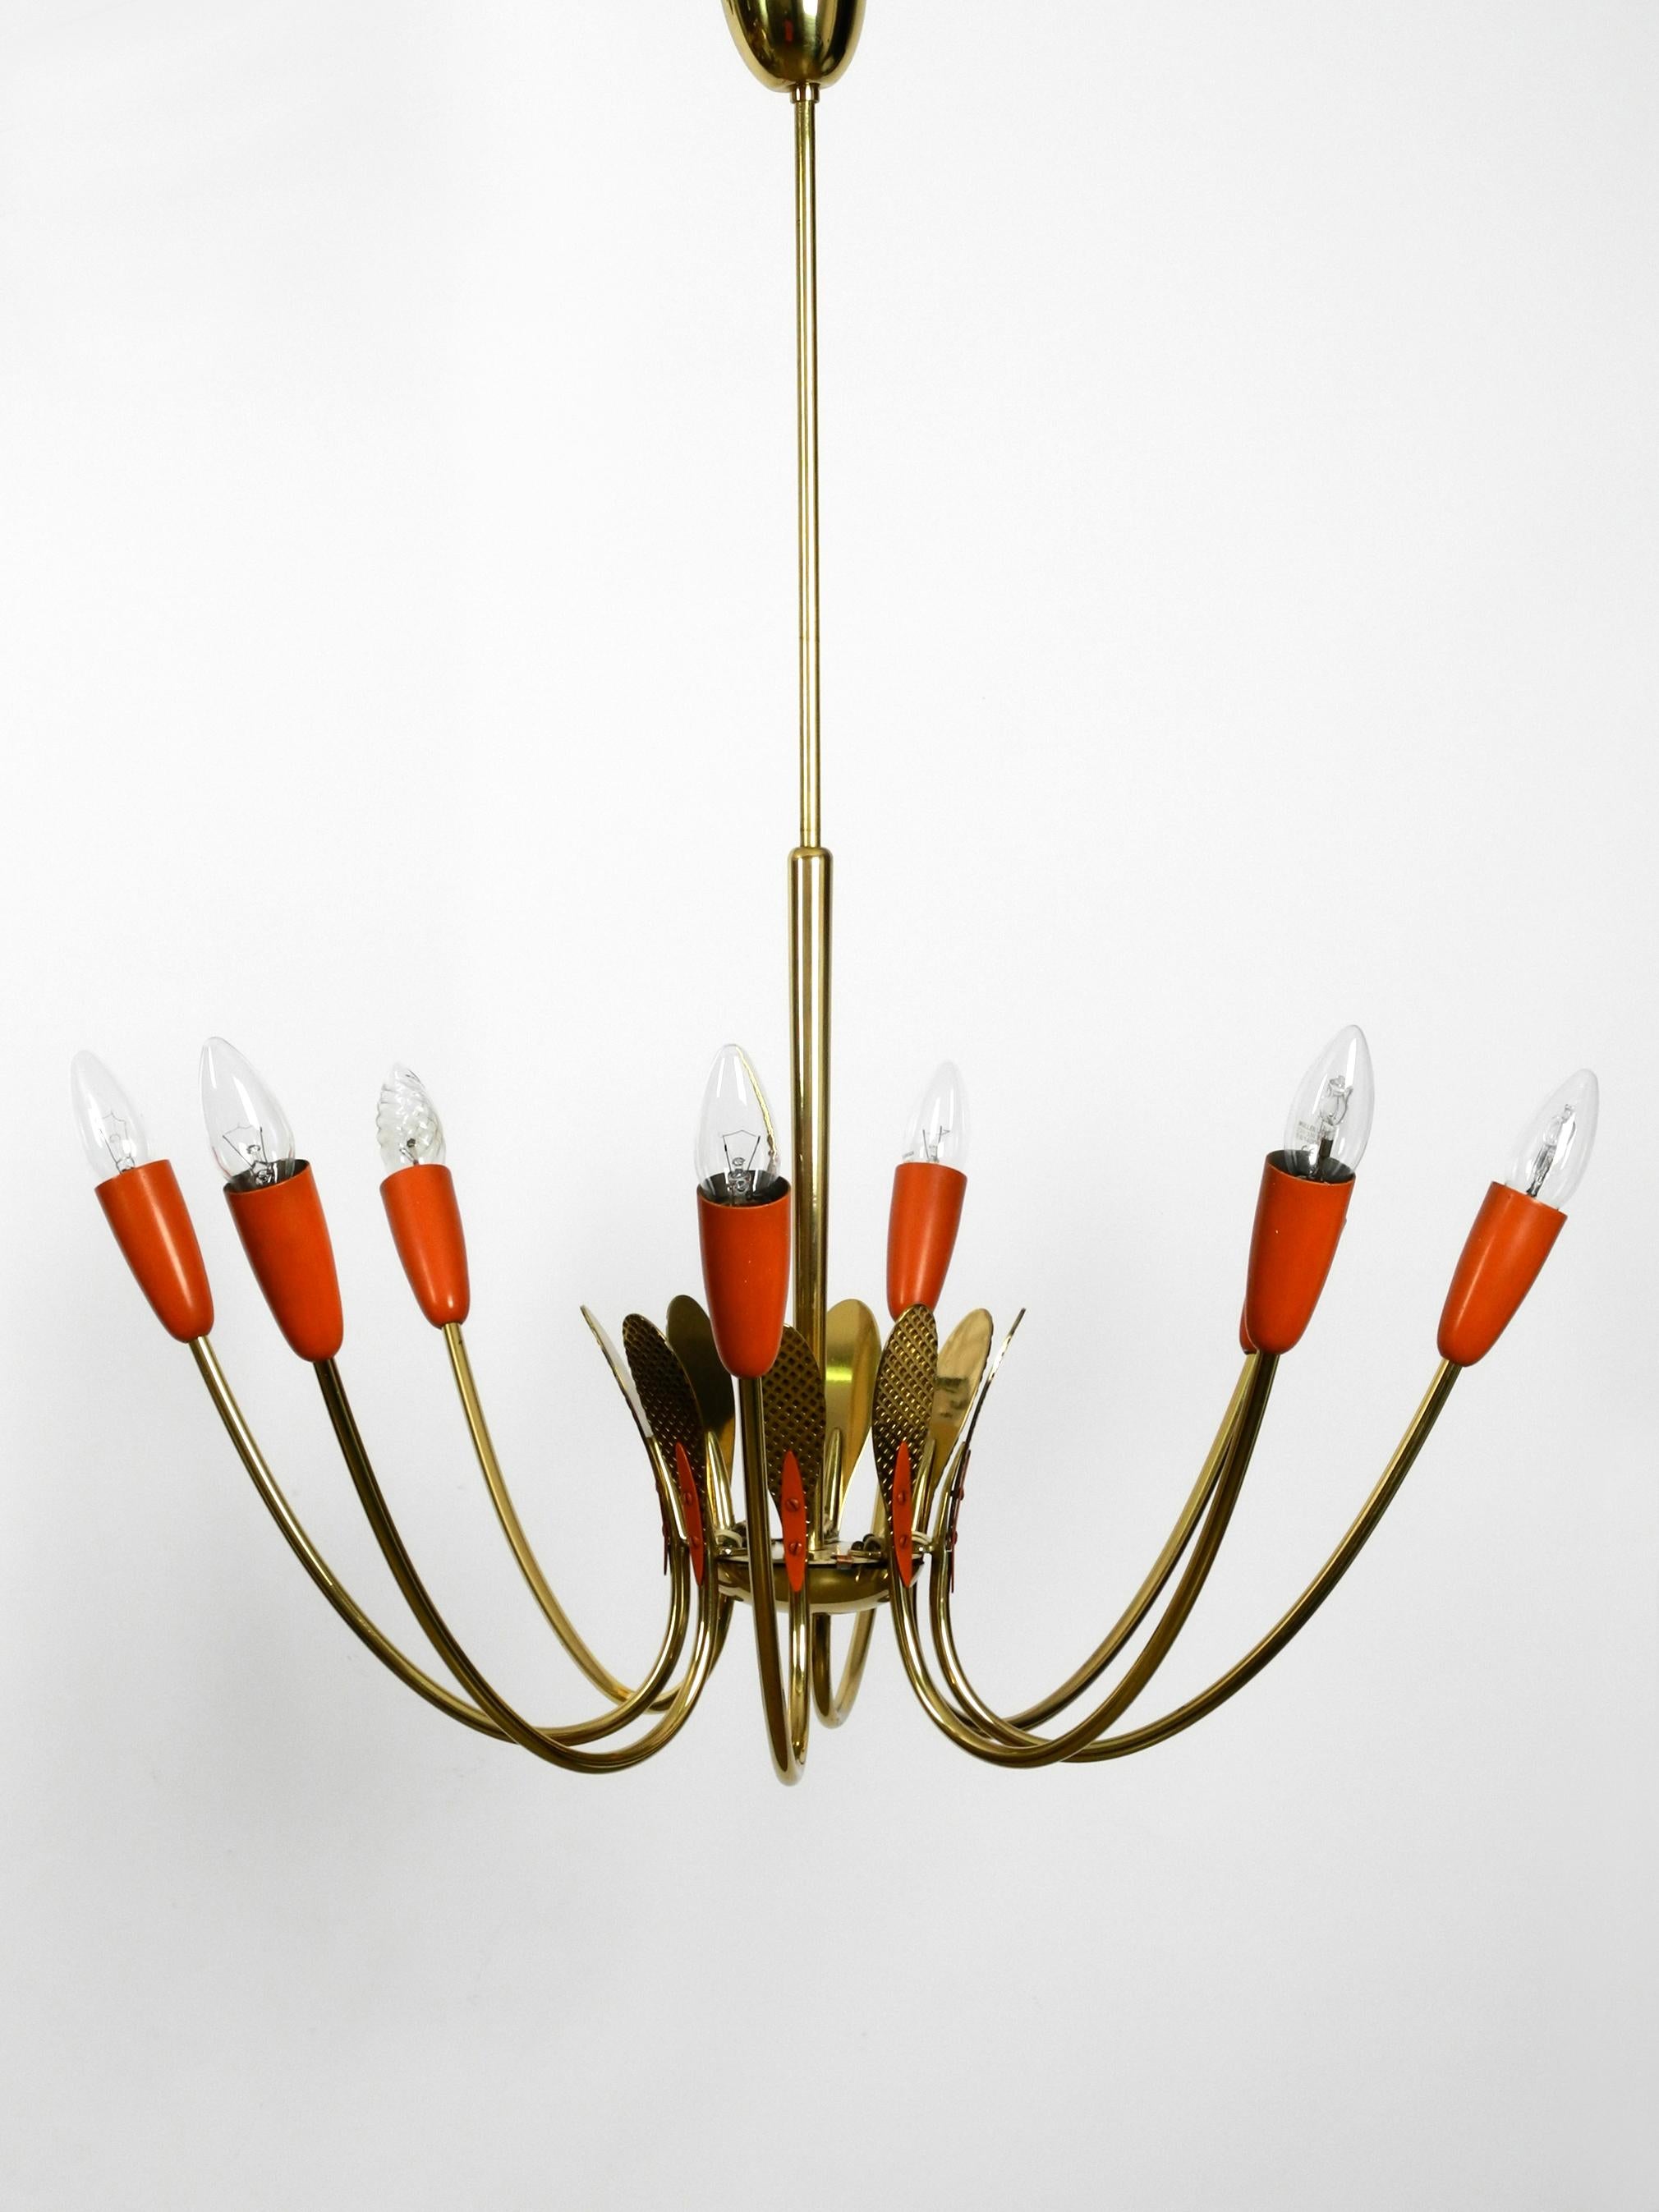 Very rare large Mid-Century Modernist Sputnik
ceiling lamp made of brass with metal cones.
Very nice Classic 1950s atomic design in good condition with great patina.
Brass frame and canopy, metal cones are painted in brick red color.
The brass